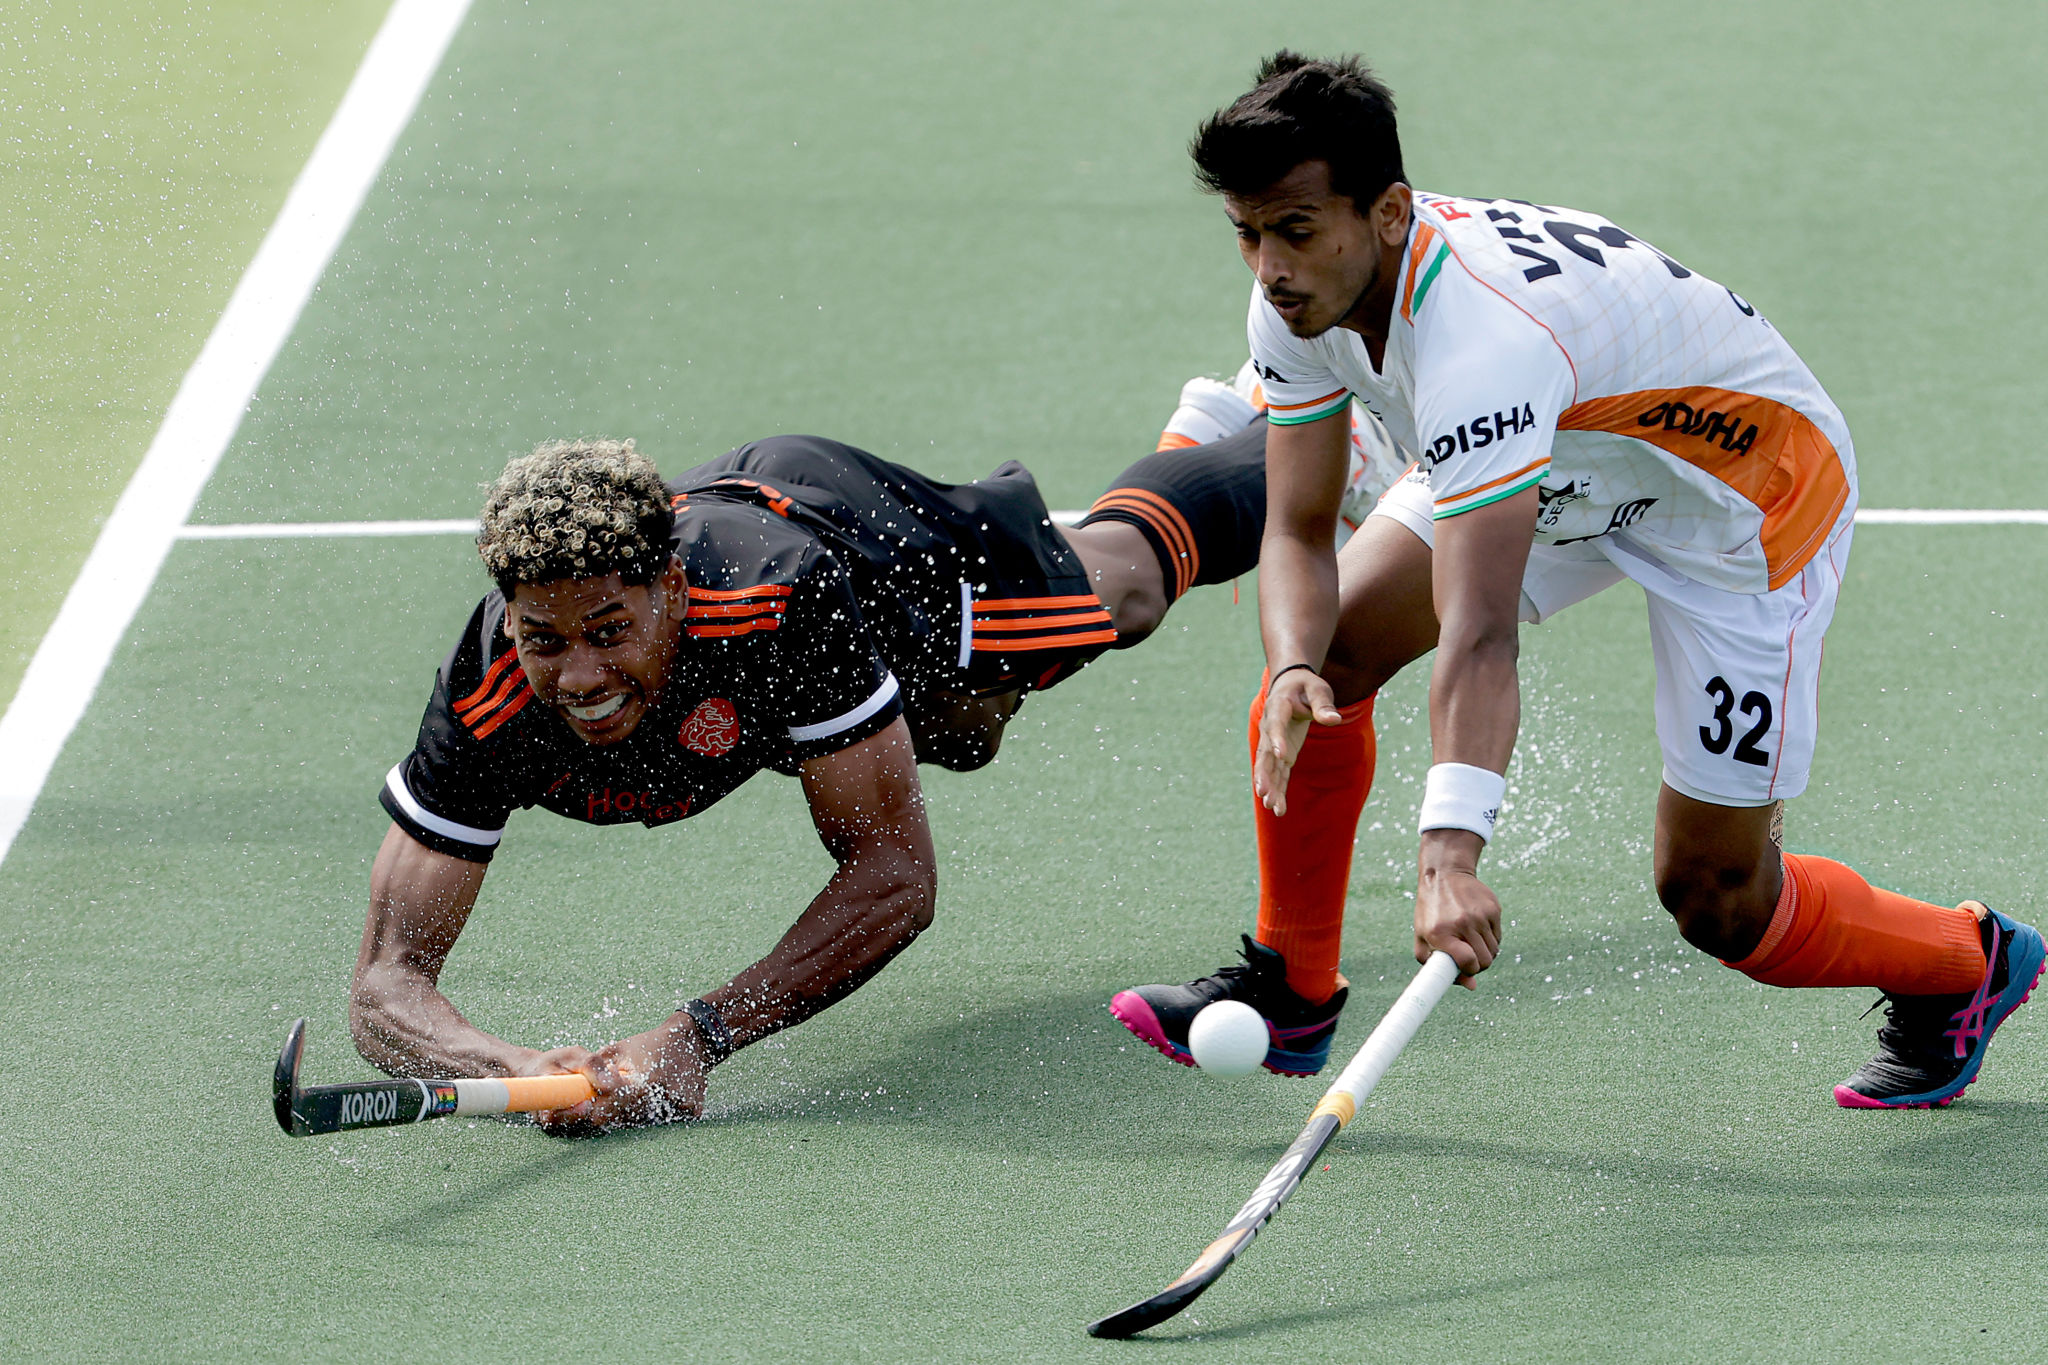 FIH Pro League LIVE: Netherlands pip India 4-1 in SHOOT-OUT after a thrilling encounter ended at 2-2: Check India vs Netherlands Hockey Highlights